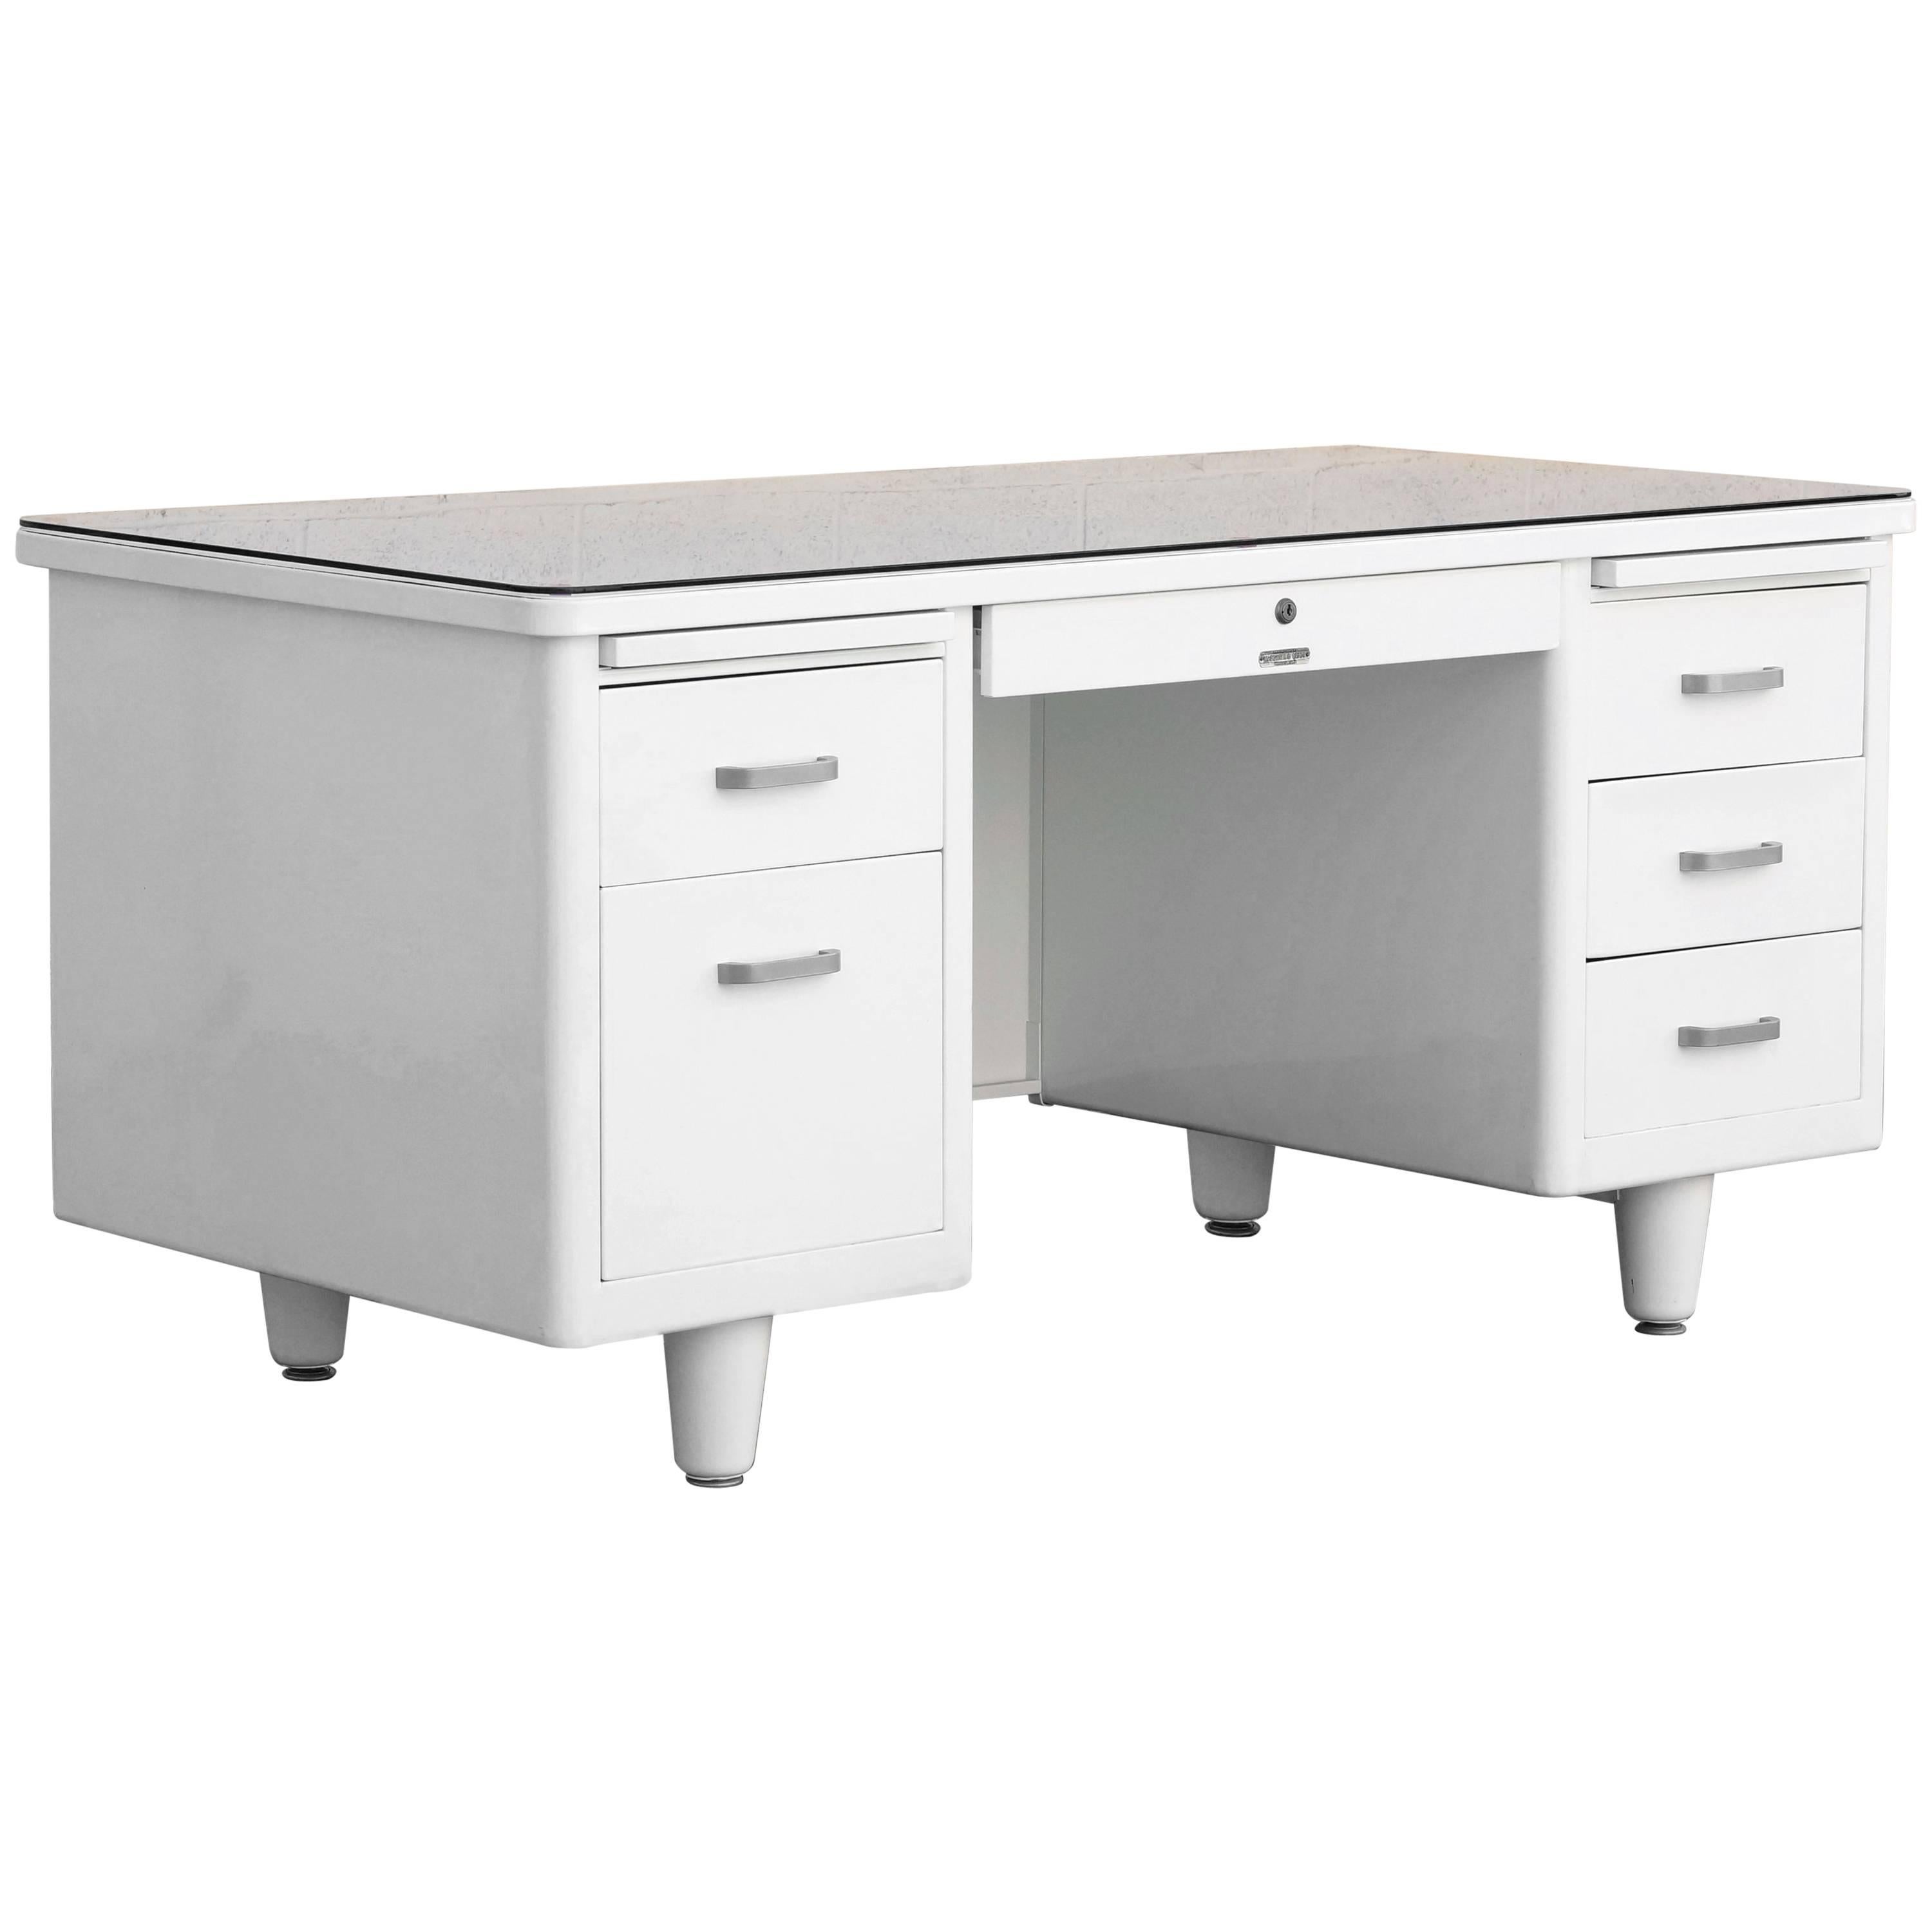 Classic Mcdowell Craig Tanker Desk Refinished In White At 1stdibs